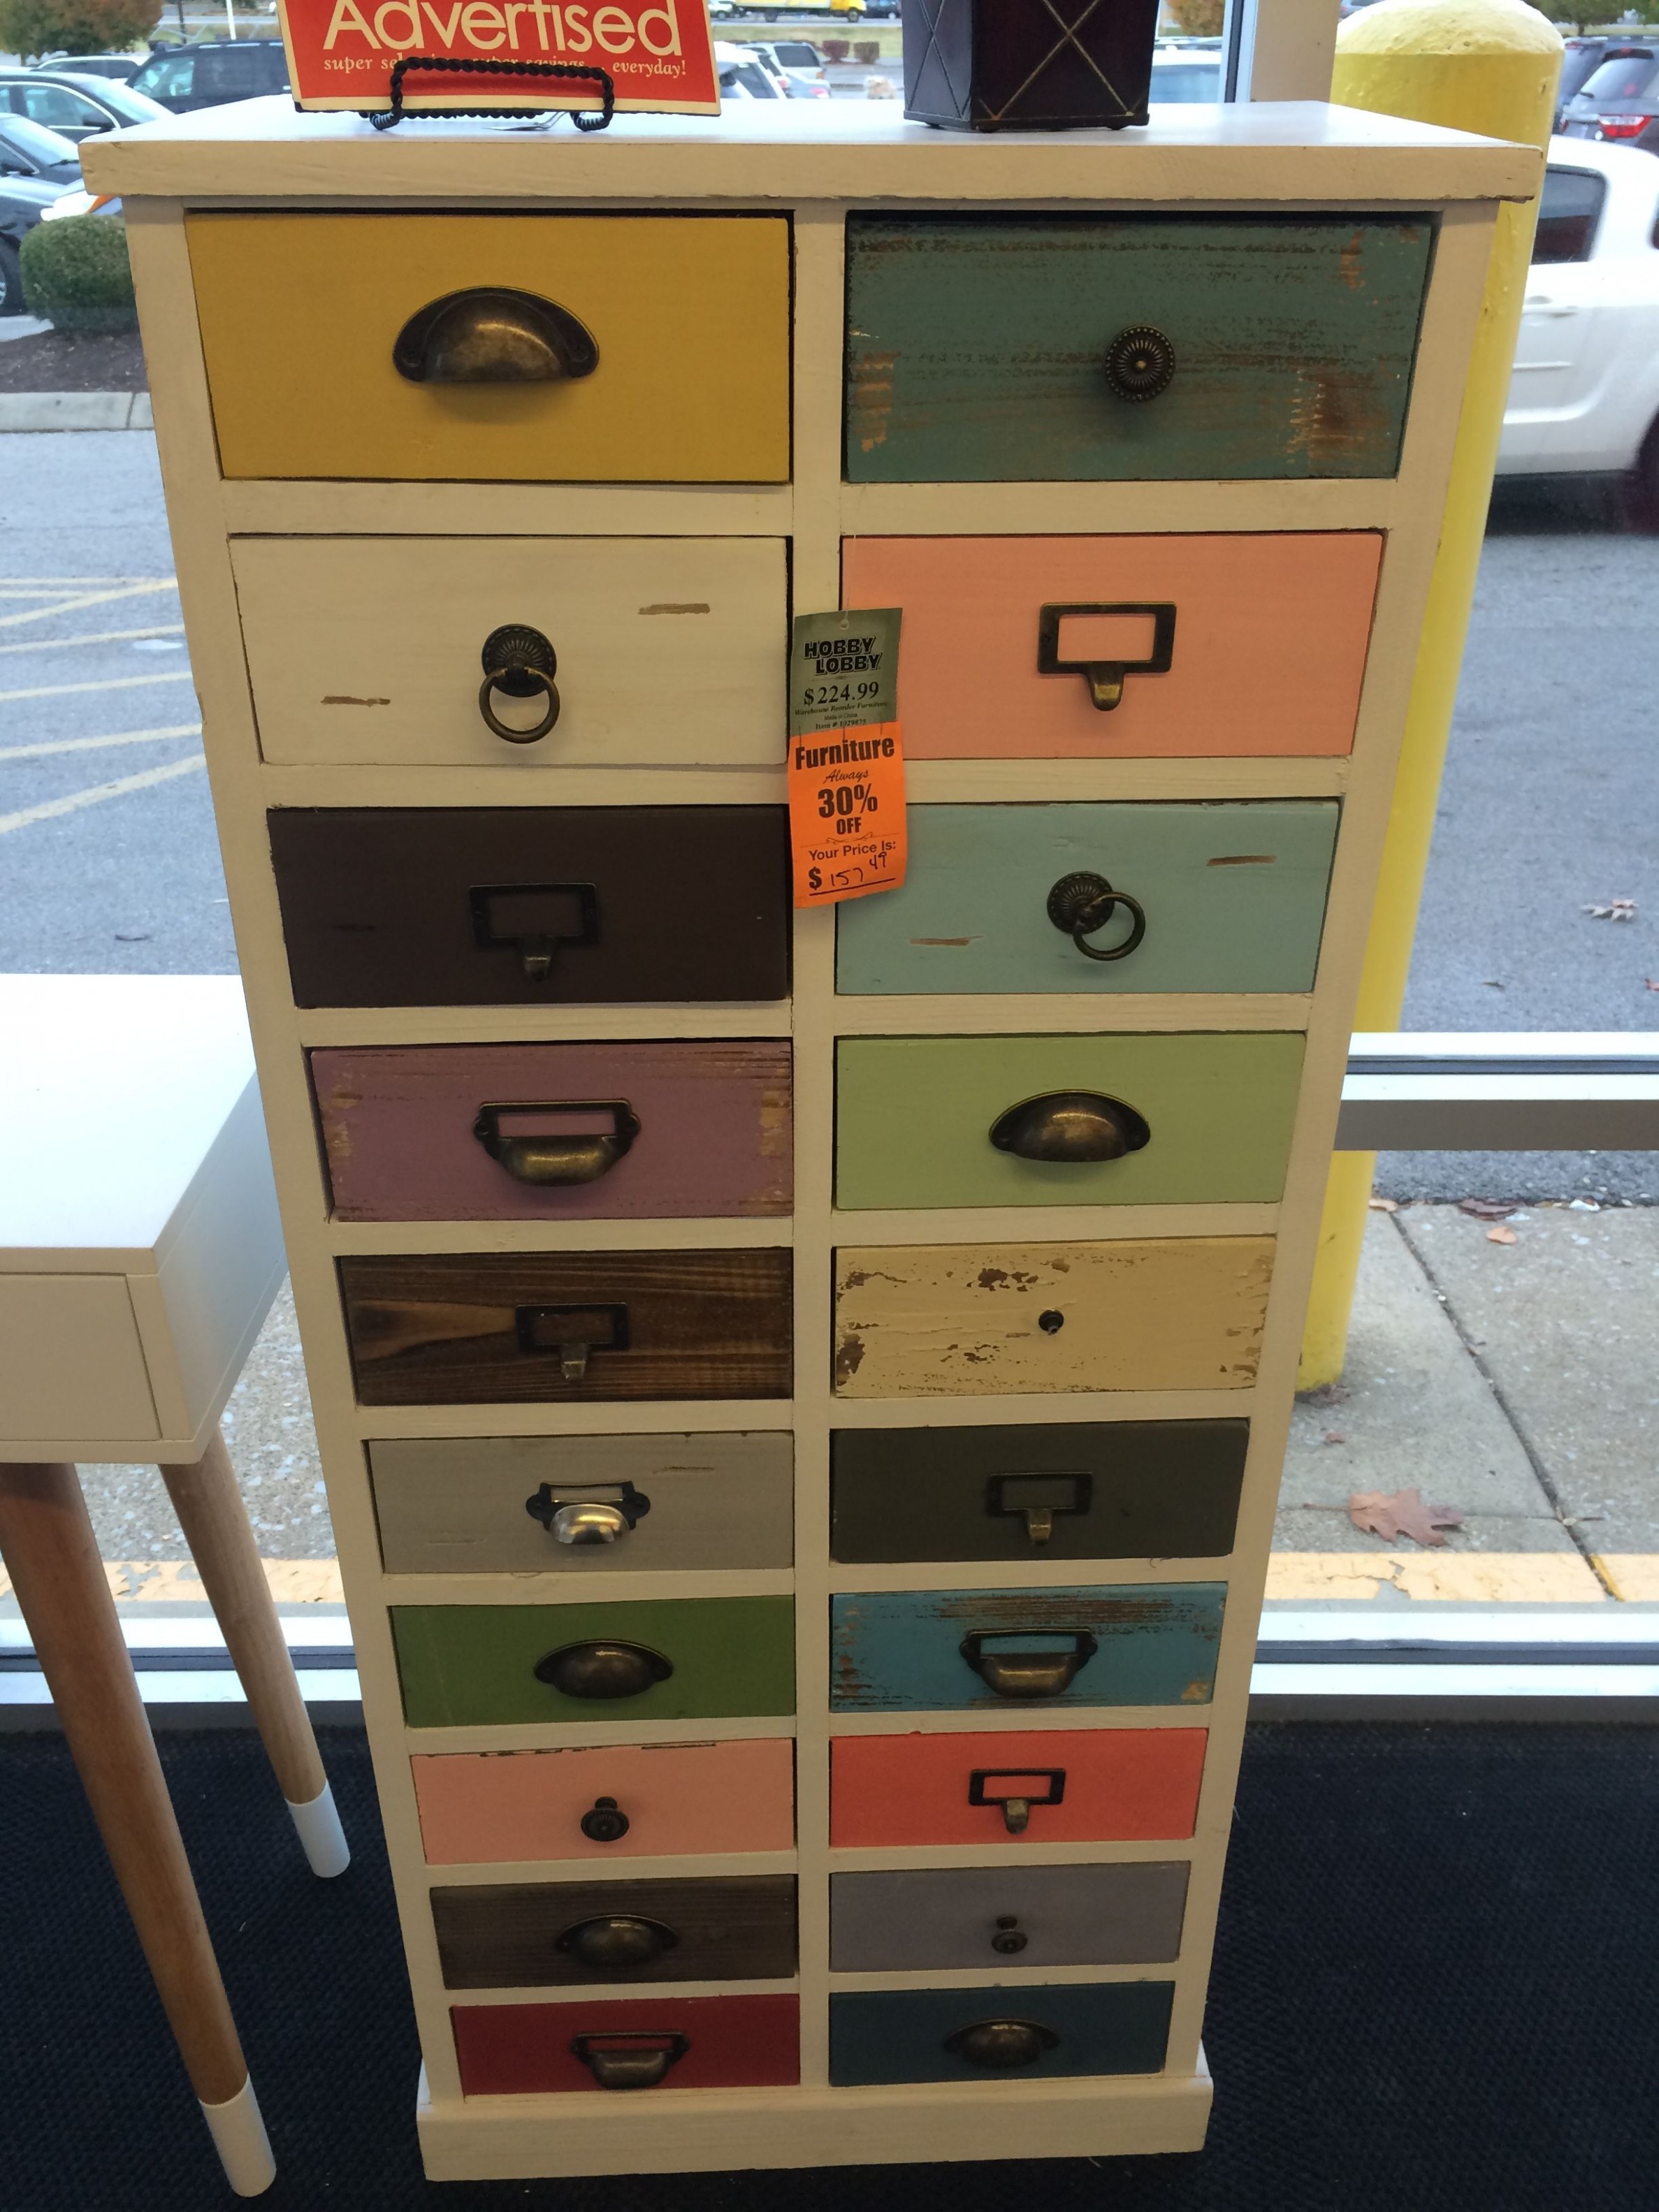 Multicolored, Multi Drawer Storage Chest At Hobby Lobby. This ..